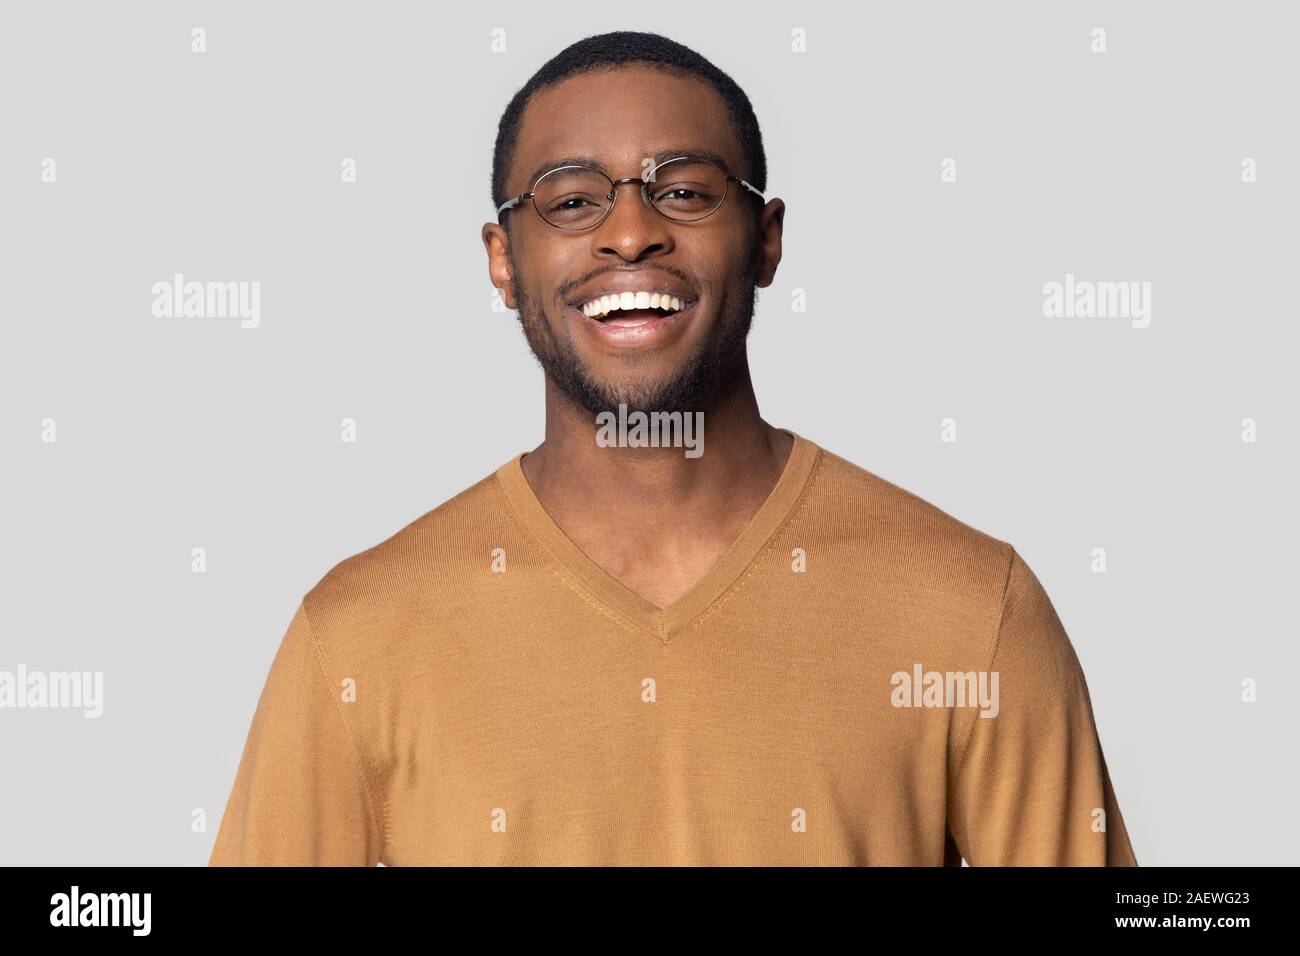 Happy smiling african american man in casual sweater portrait. Stock Photo